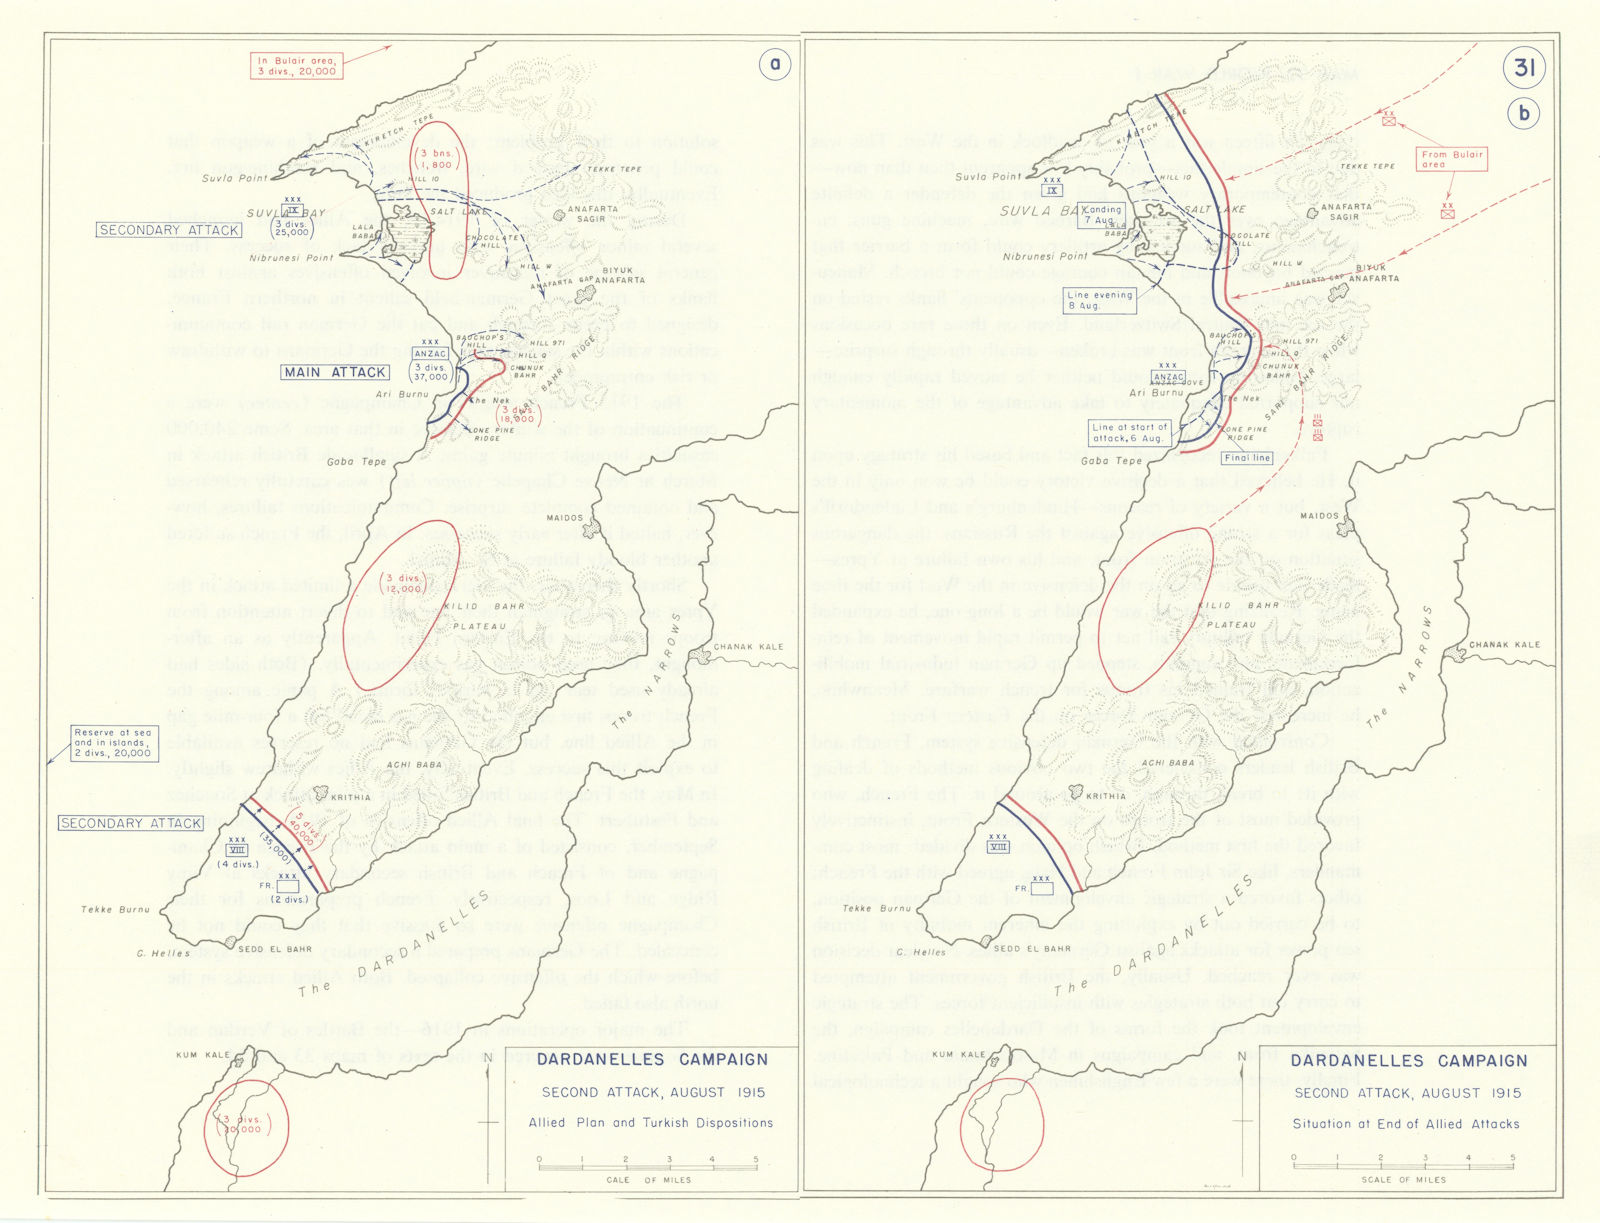 World War 1. Dardanelles Campaign. August 1915 Second Allied Attack 1959 map